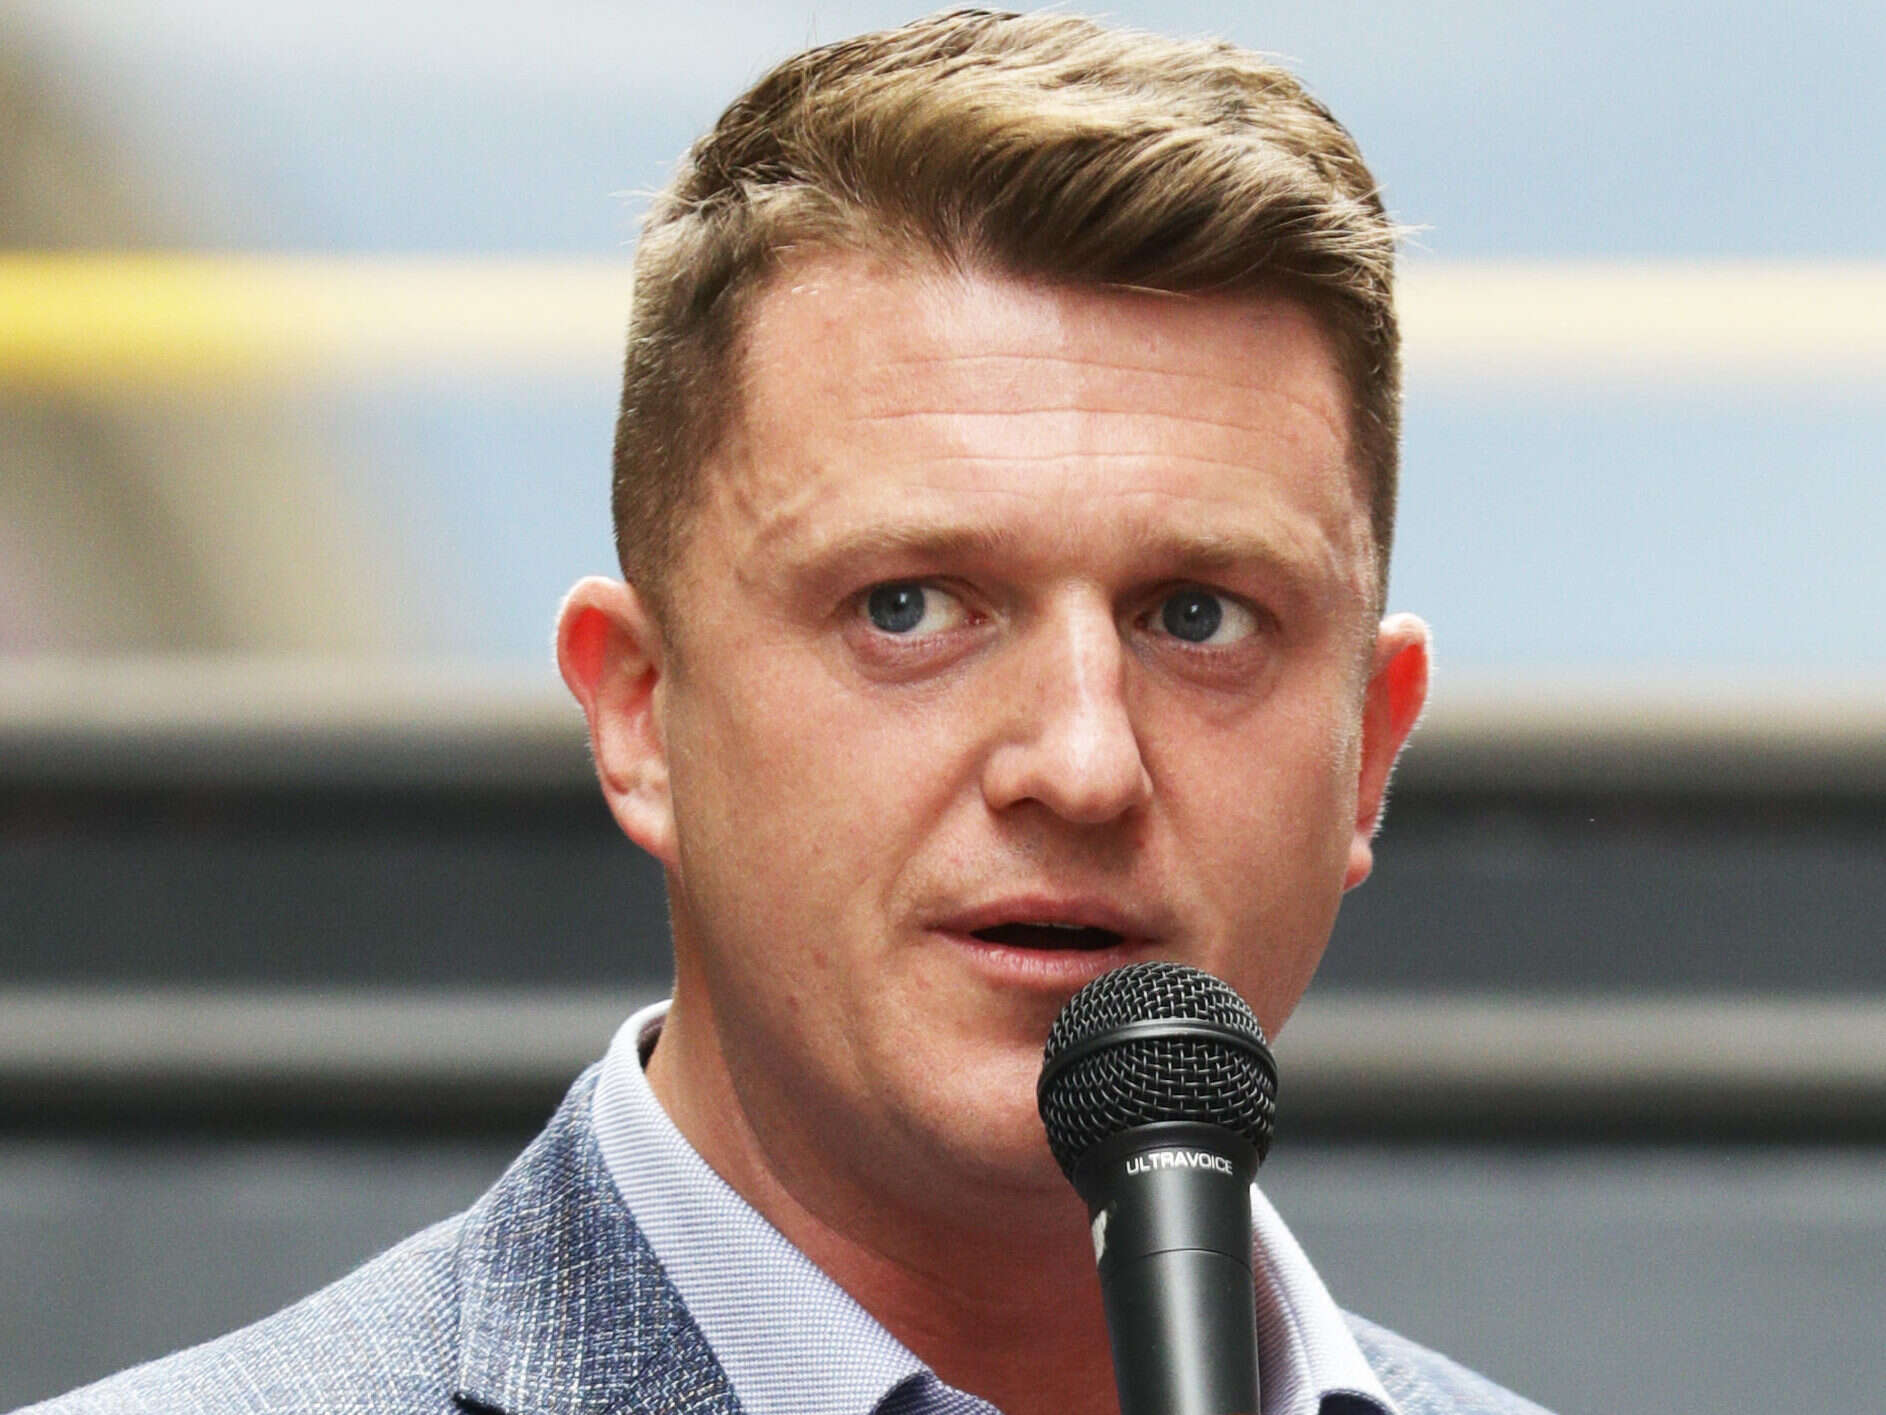 Tommy Robinson encouraged 'vigilante action' by filming defendants in criminal trial, High Court judges find